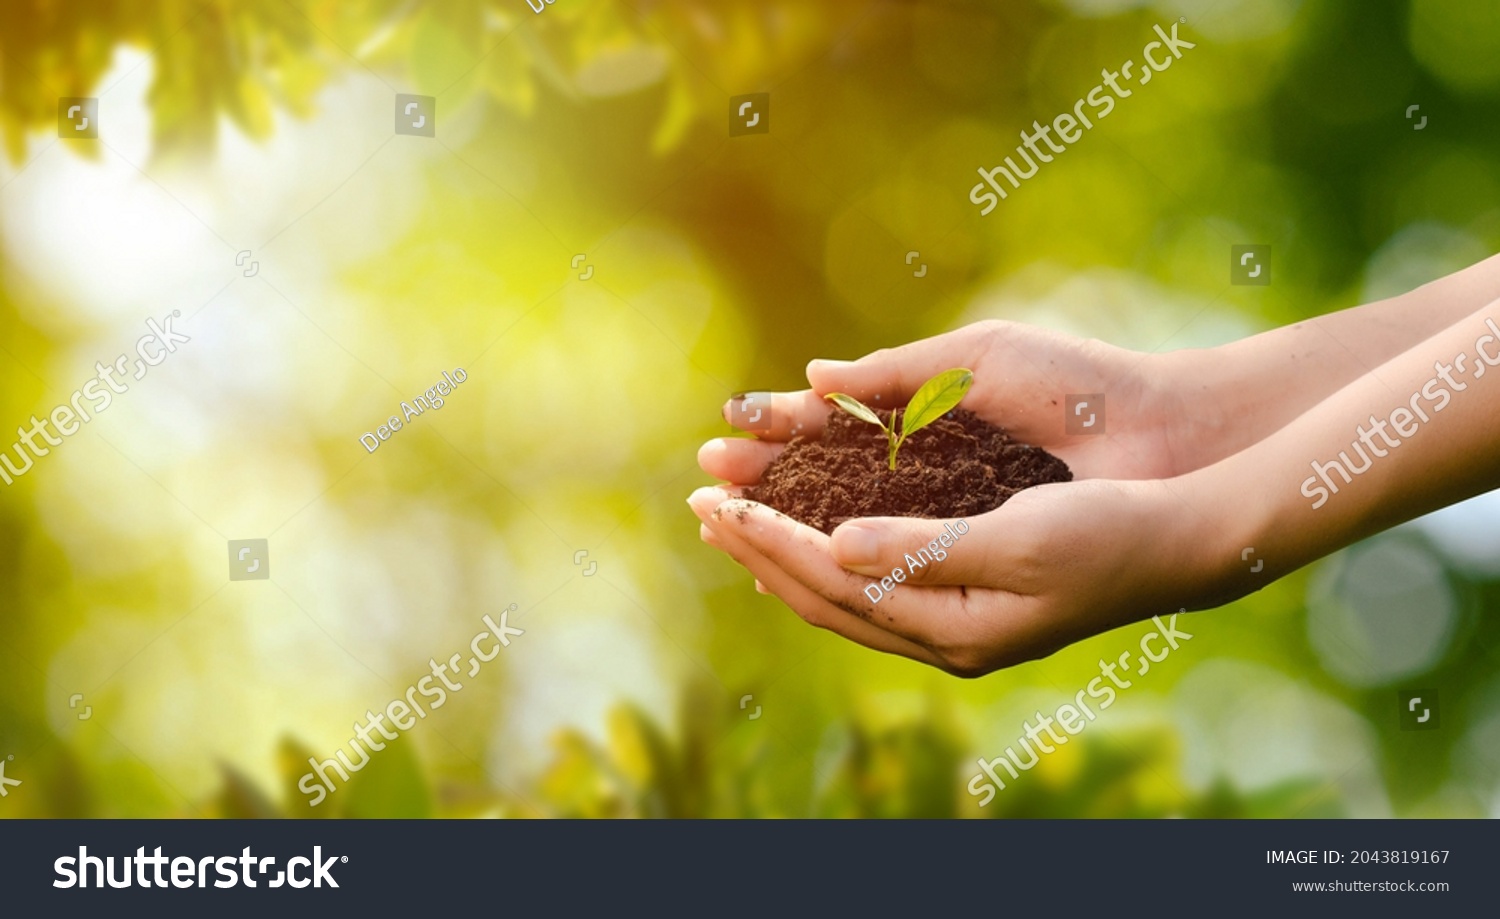 world environment day concept: planting trees to save the world with human hands holding small trees over blurred agricultural field background #2043819167